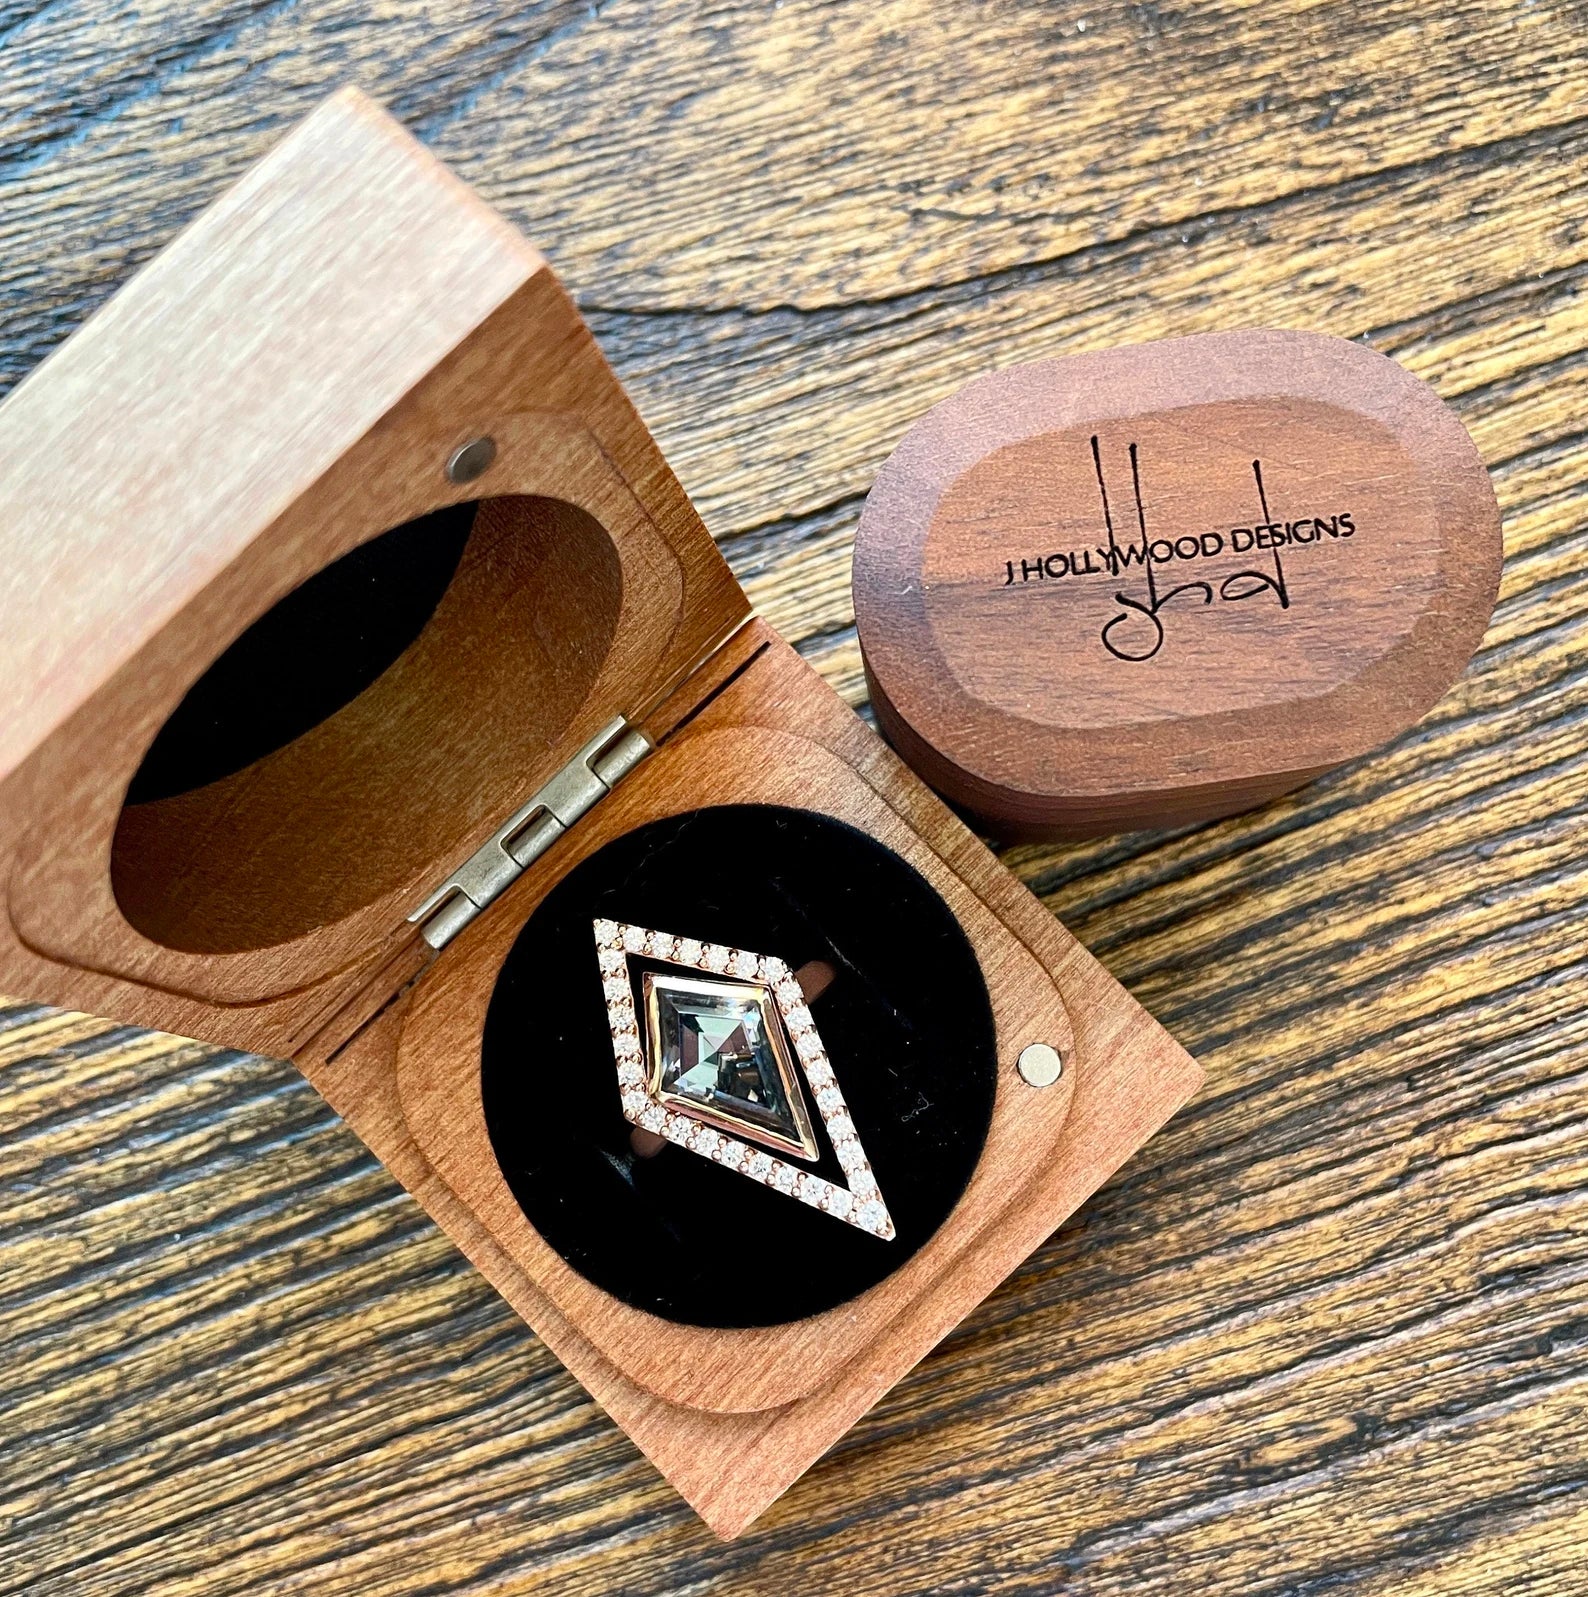 hexagon epoxy resin & wood wedding ring box for ceremony, Boho Epoxy  Wedding Ring Boxes his hers, Transparent Epoxy dubble Ring Box for wedding,  Wood resin flowers Marriage Proposal Ring Box